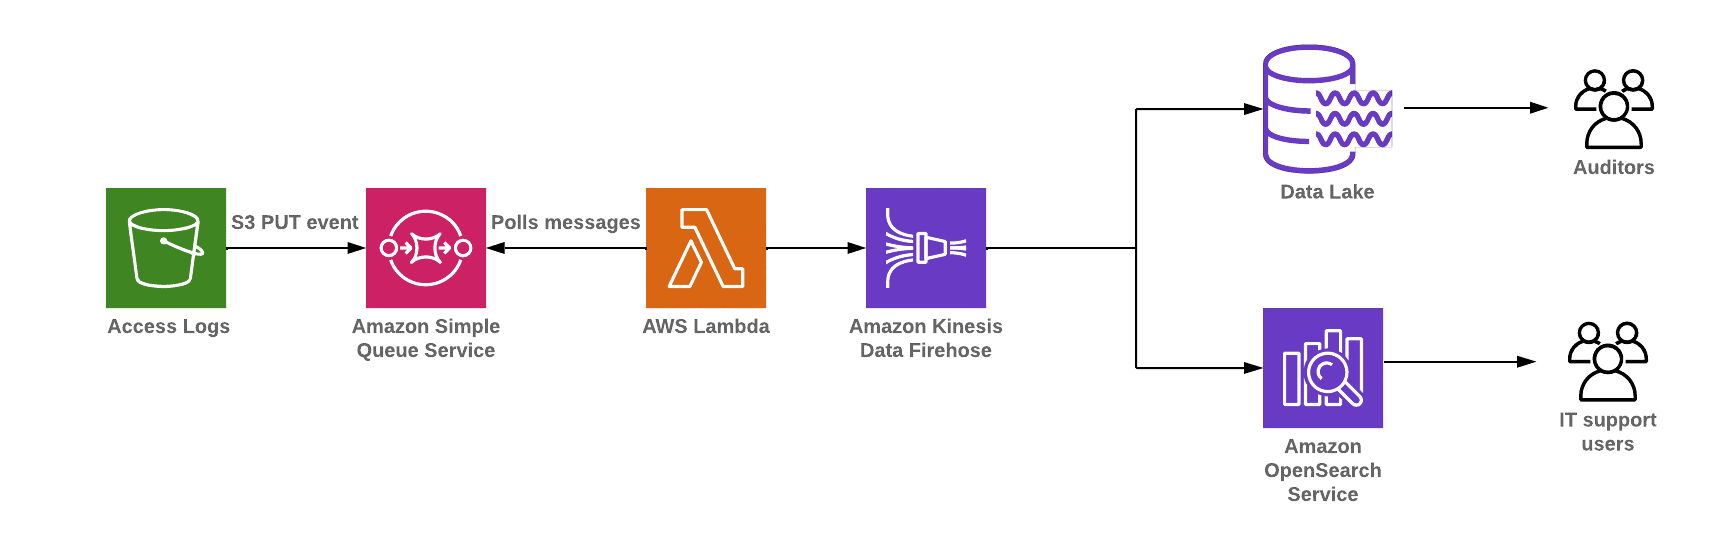 
          Access logs streaming applications for anomaly detection using Amazon Kinesis Data
            Analytics and Amazon OpenSearch Service 
        